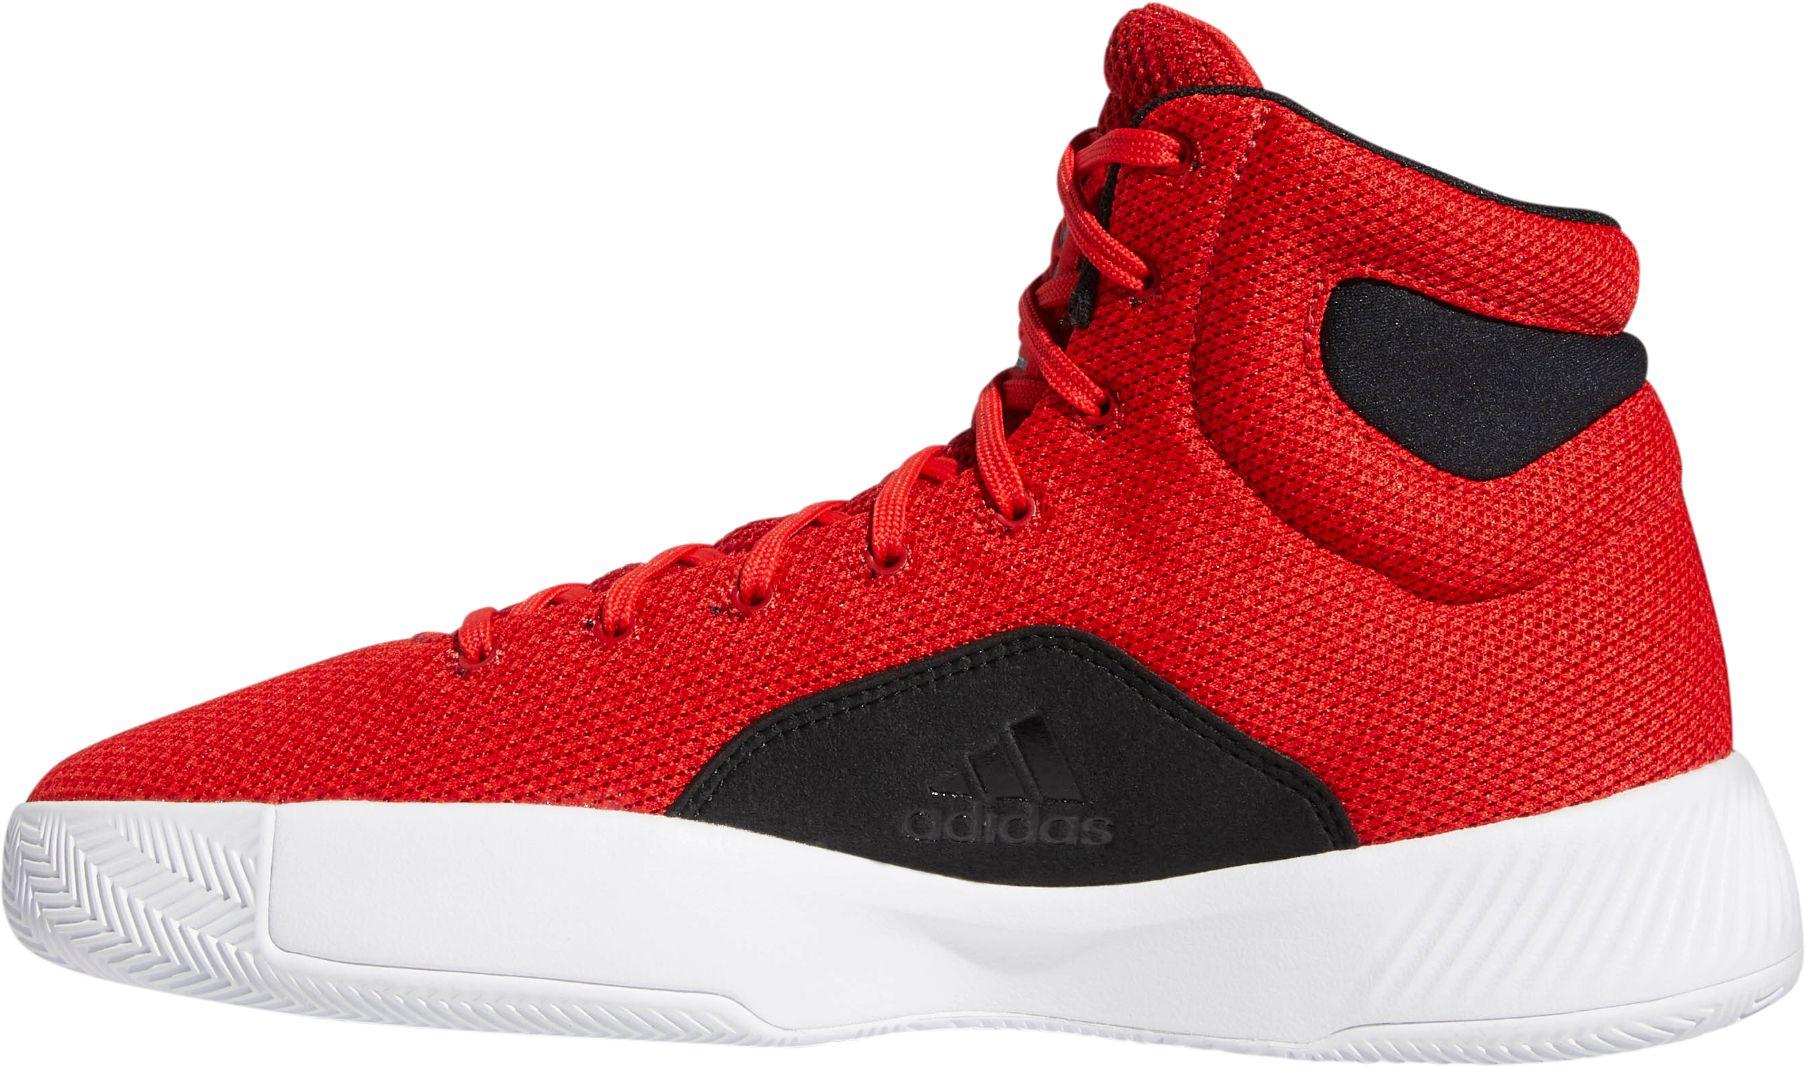 adidas Pro Bounce 2019 Basketball Shoes in Red for Men - Lyst